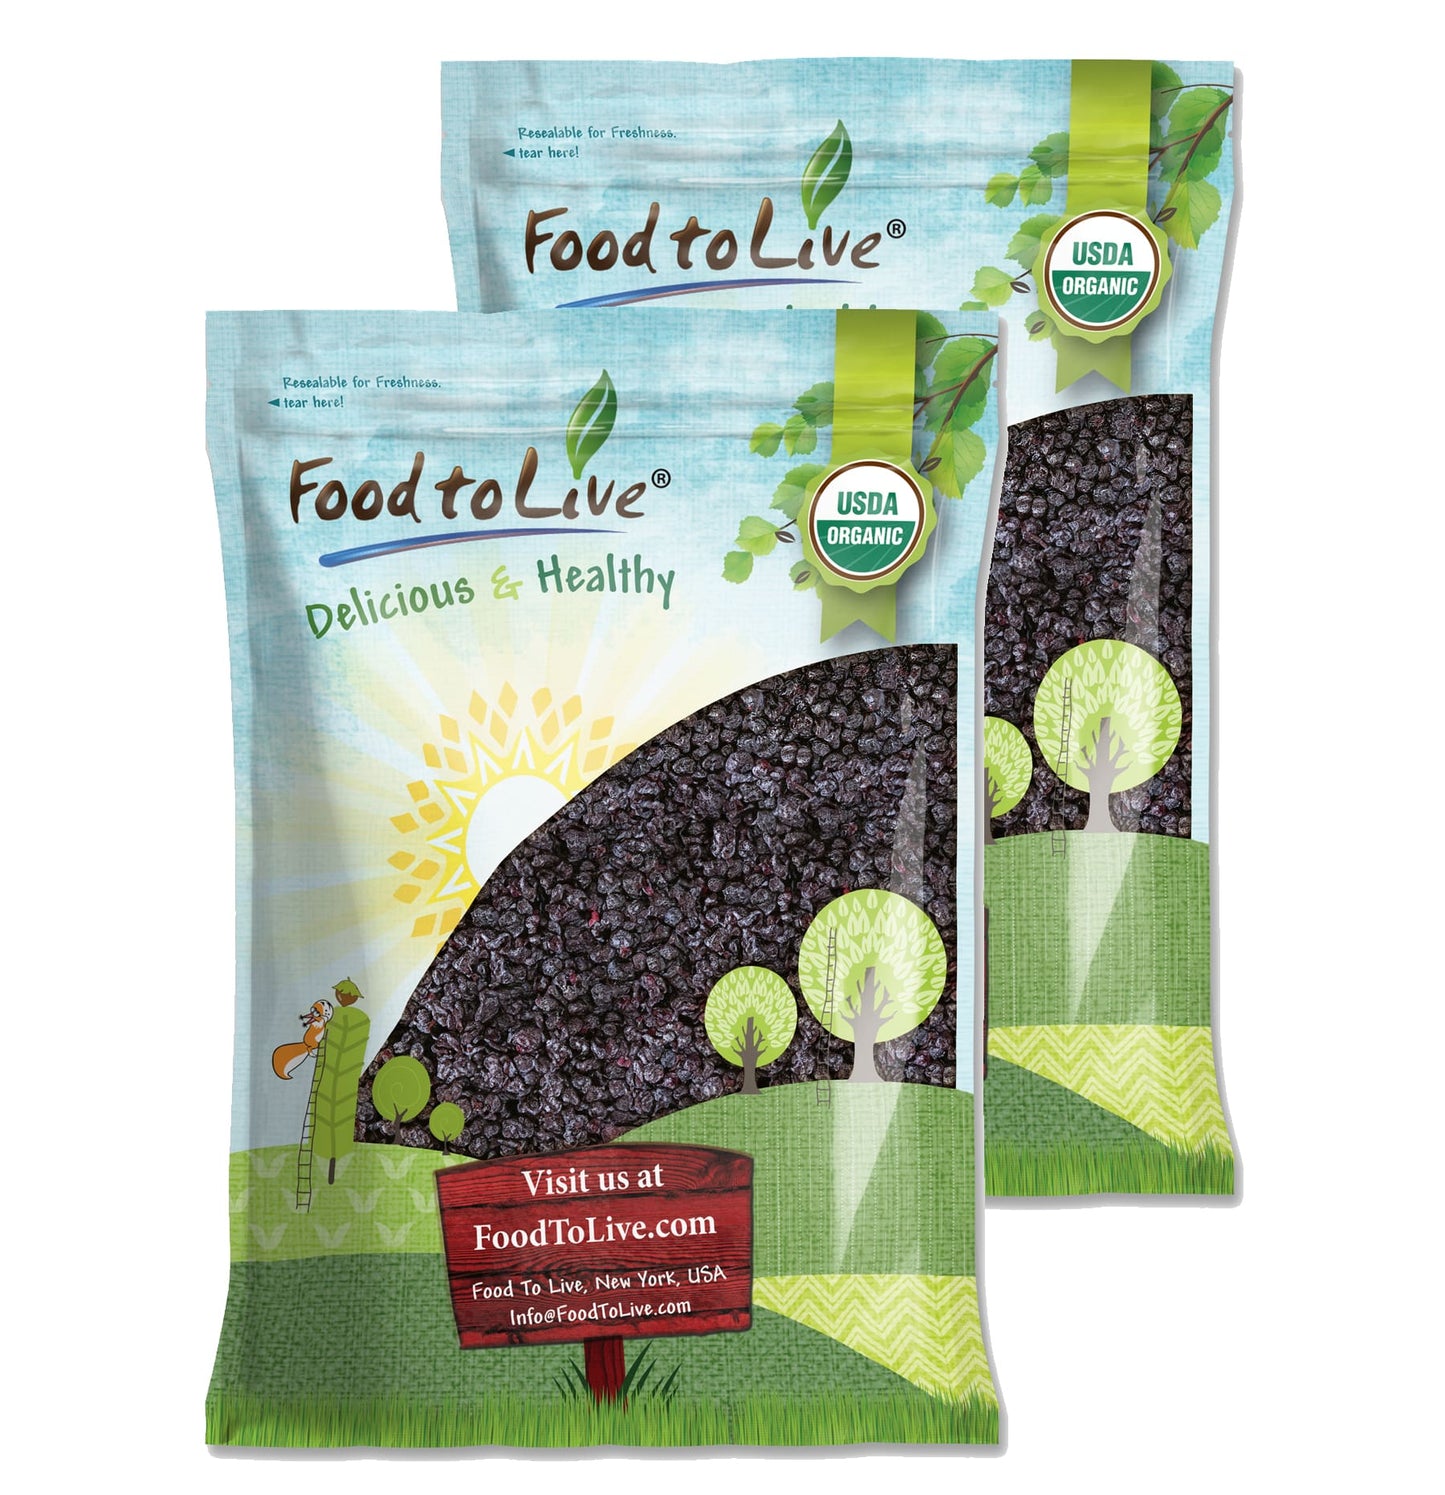 Dried Blueberries – Unsulfured. Rich in Nutrients. Perfect Snack or Addition to Cereals, Salads, Yogurt, and Baking. Lightly Sweetened, and Coated with Sunflower Oil. Made in USA